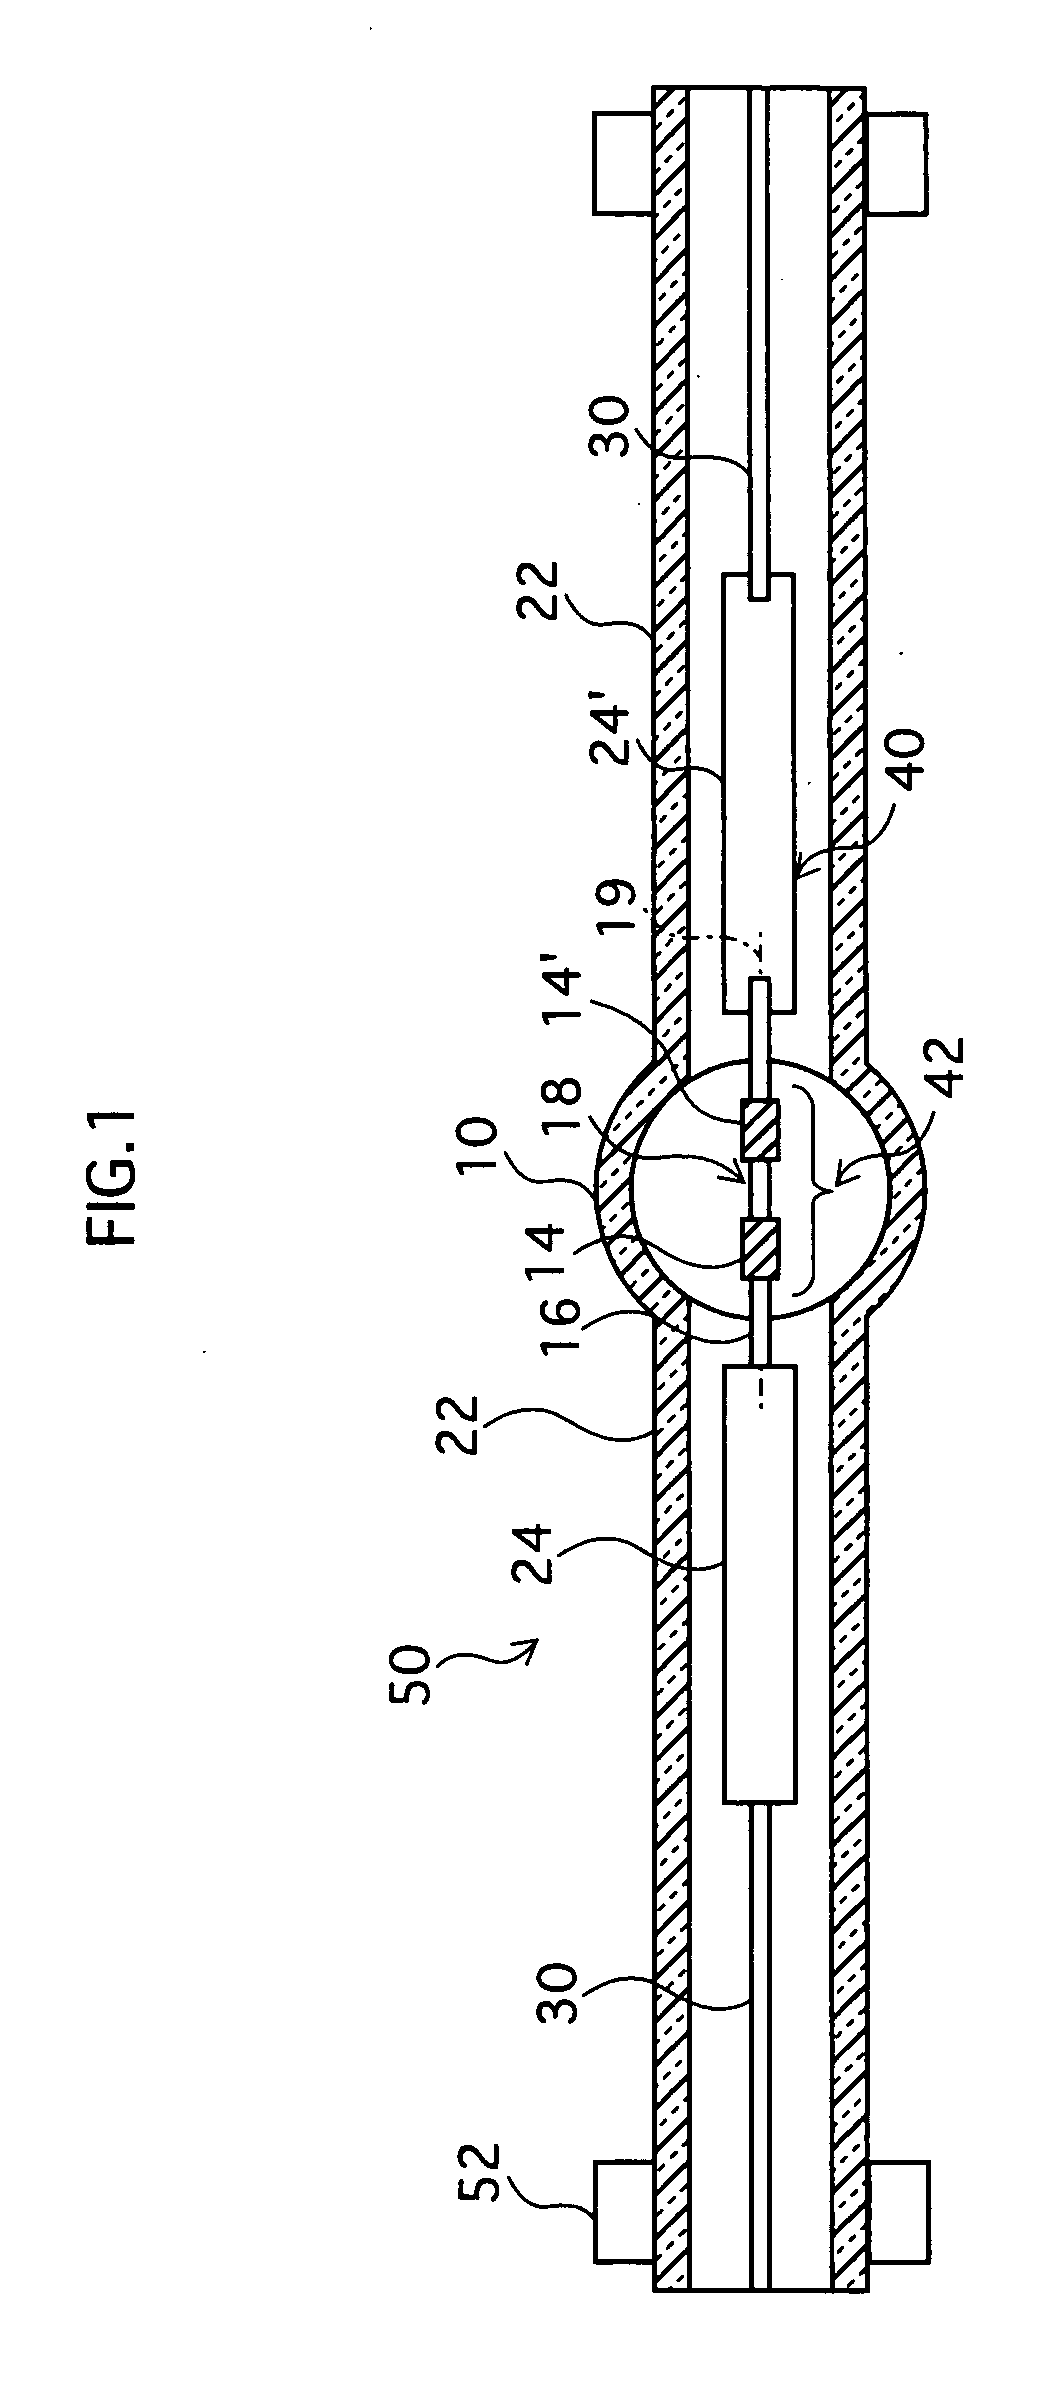 Production method of discharge lamp